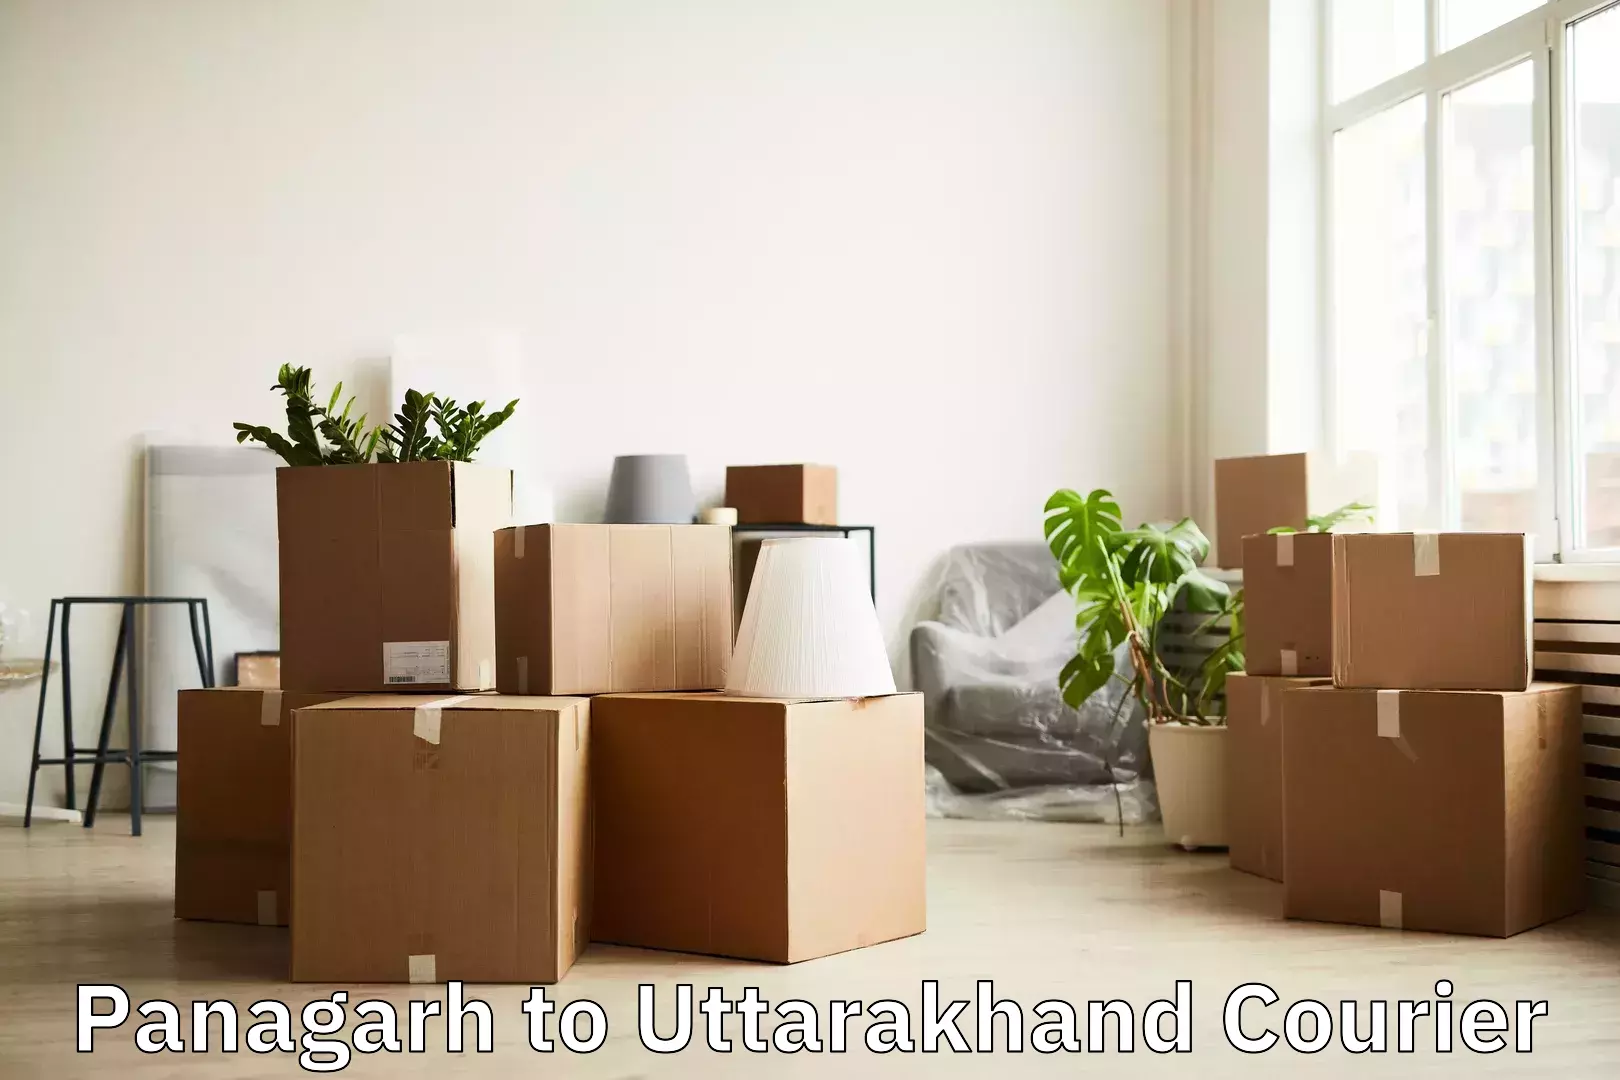 Luggage transport consulting Panagarh to Lohaghat